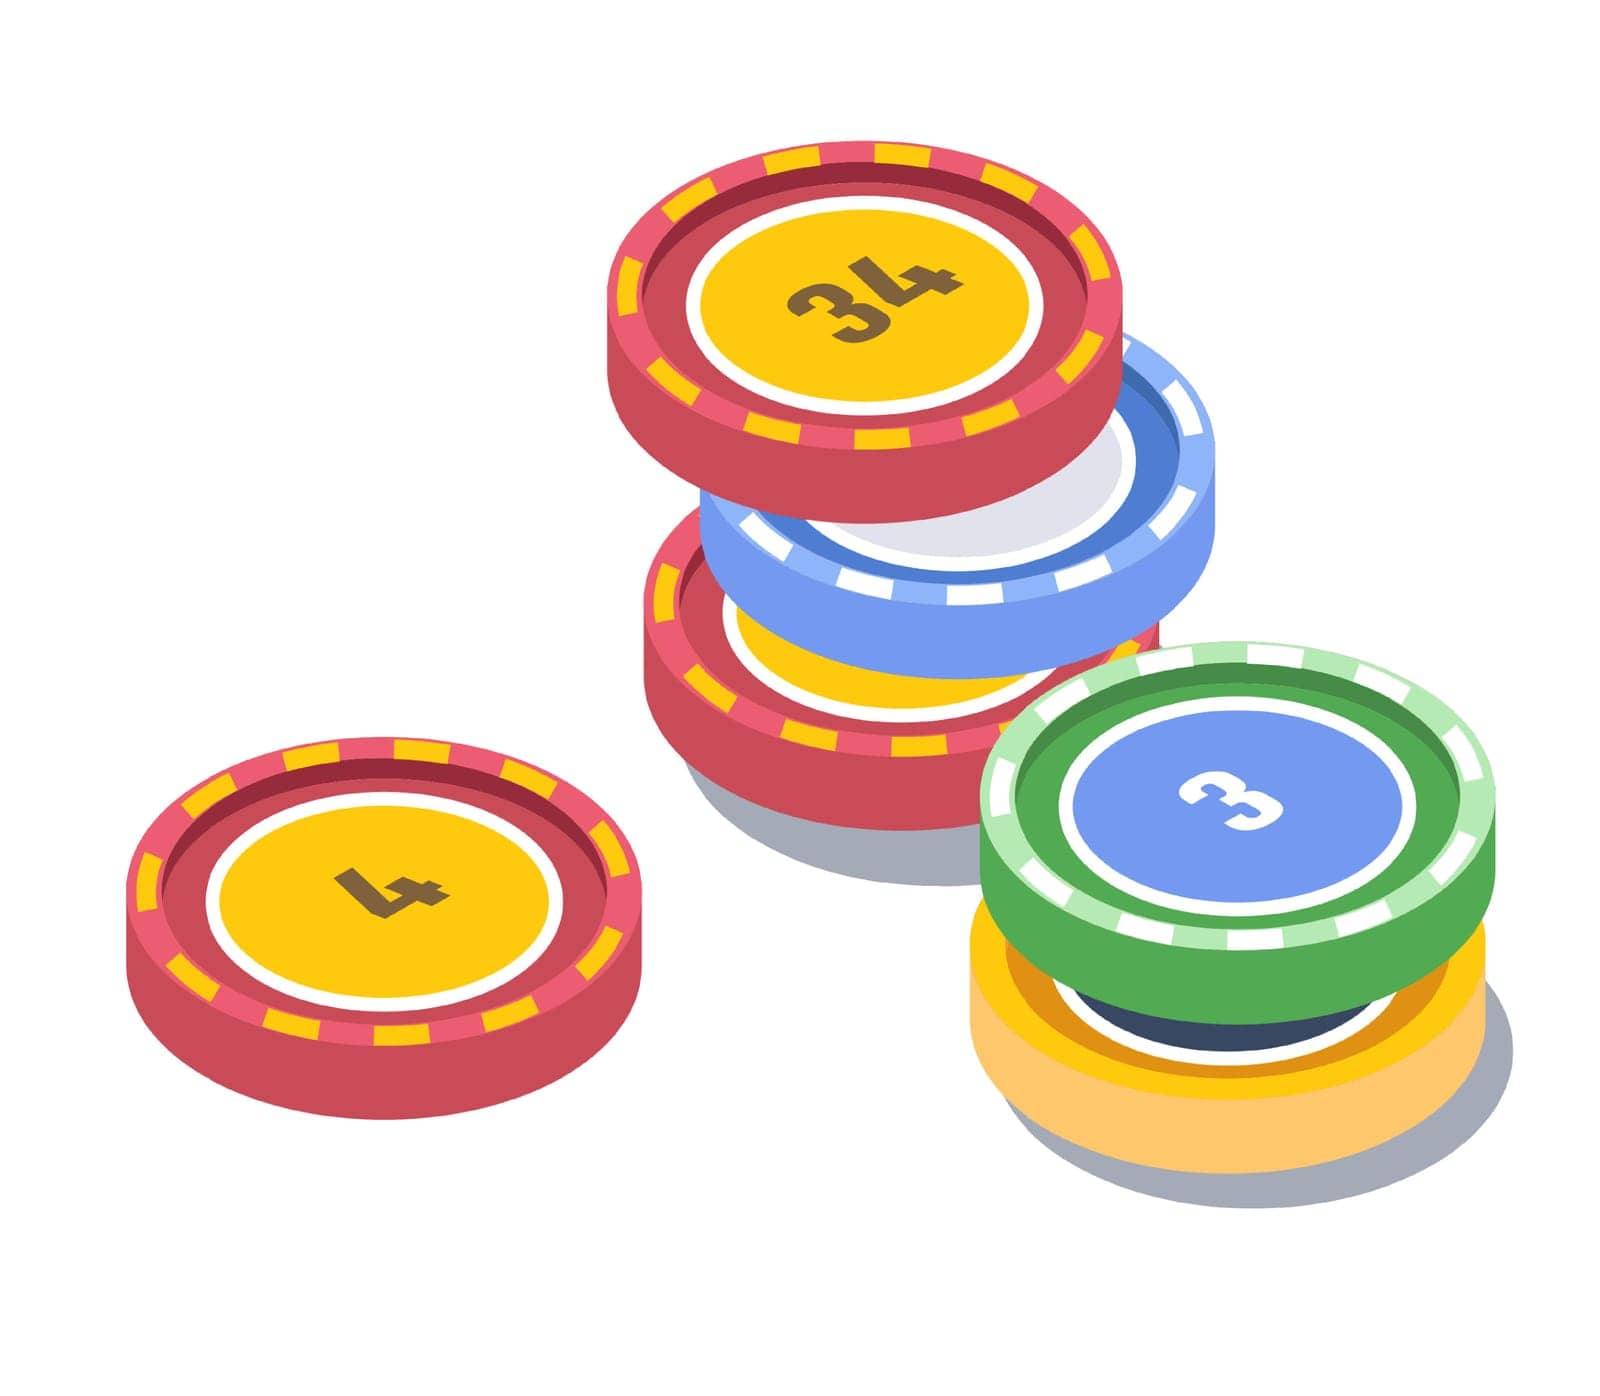 Games and entertainment, isolated casino chips with numbers. Playing and having fun, gambling and winning money. Leisure and hobbies or recreation at weekends, store assortment. Vector in flat style